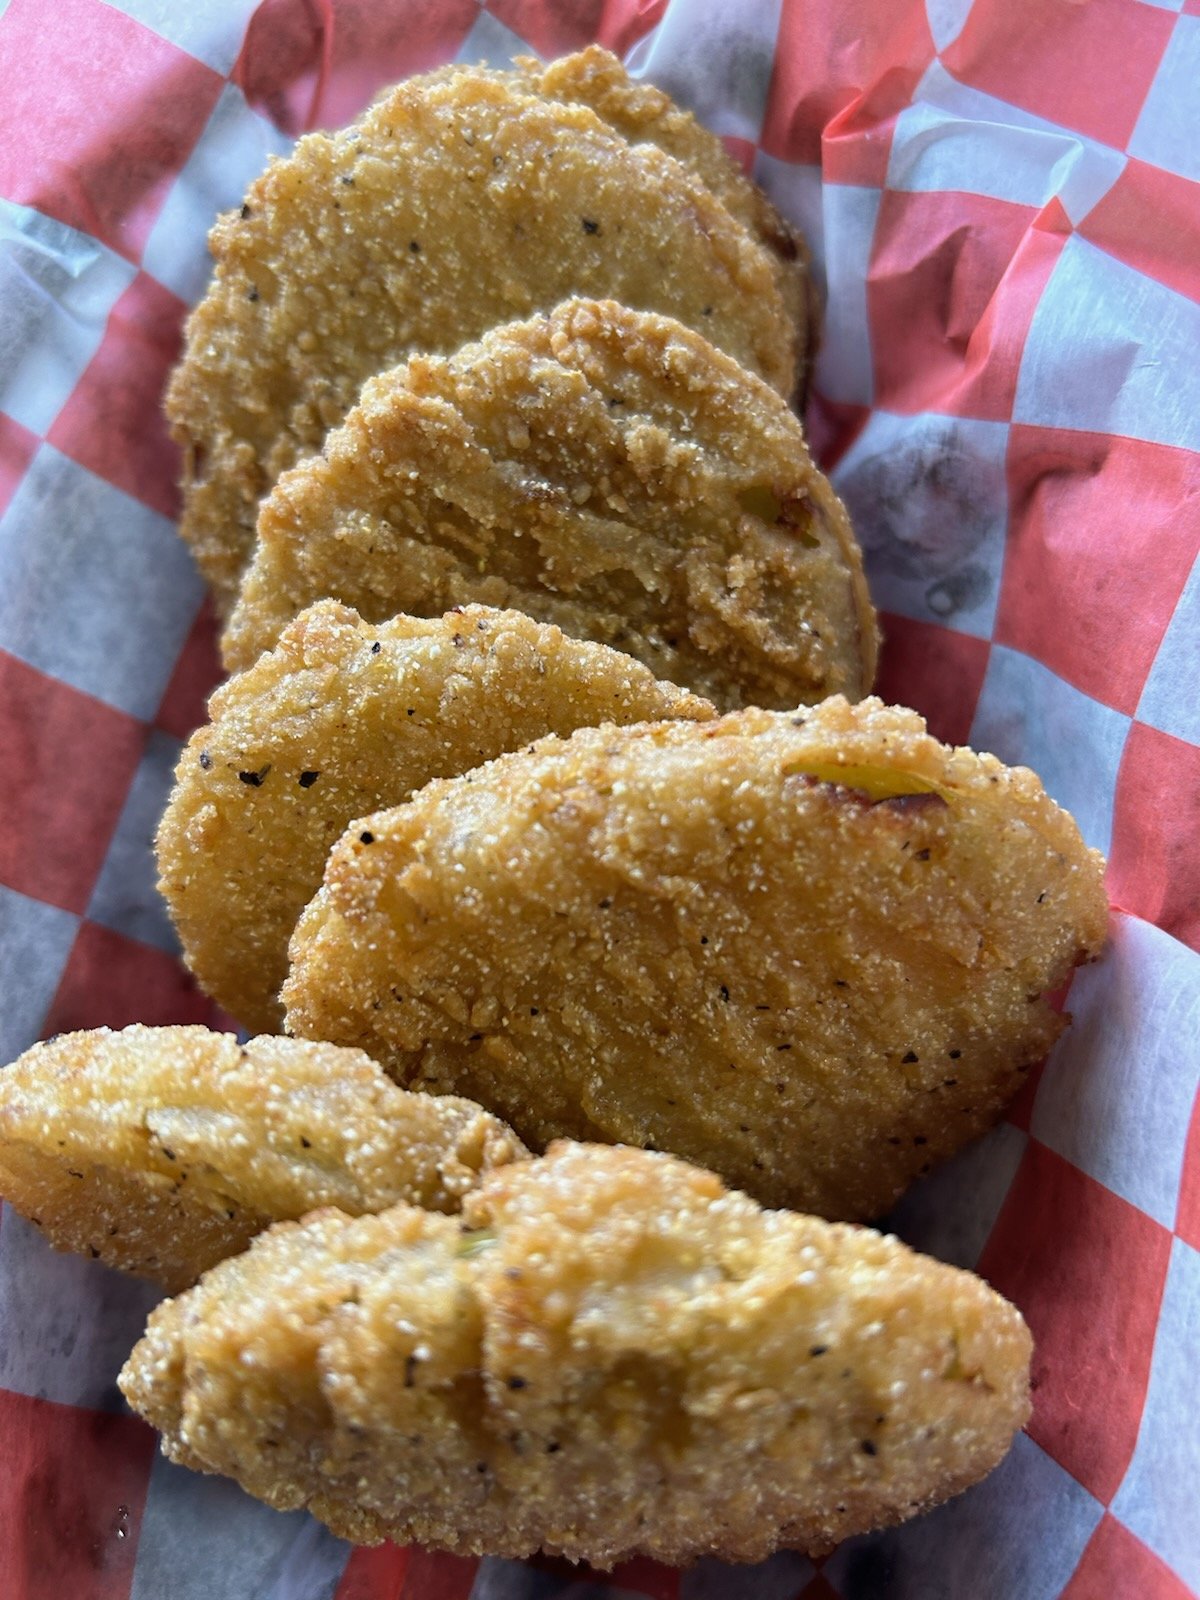   FRIED GREEN TOMATOES  